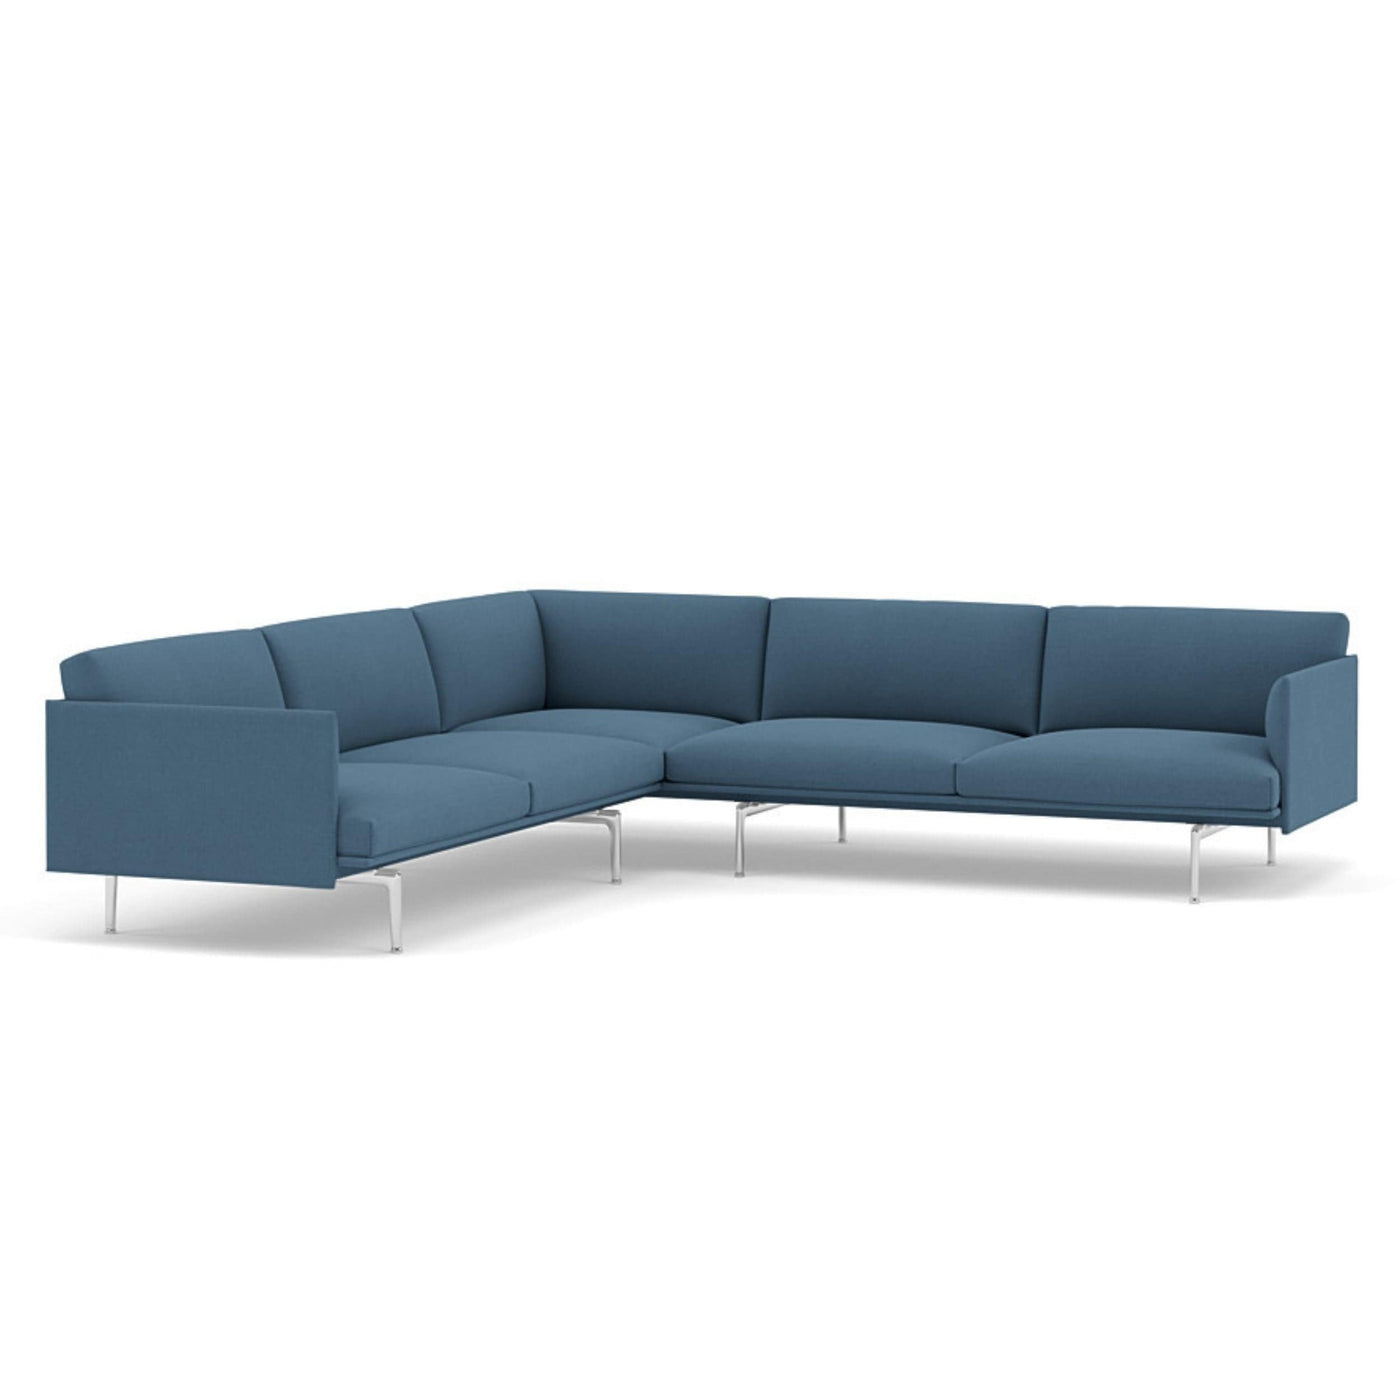 muuto outline corner sofa in vidar 733 blue fabric and polished aluminium legs. Made to order from someday designs. #colour_vidar-733